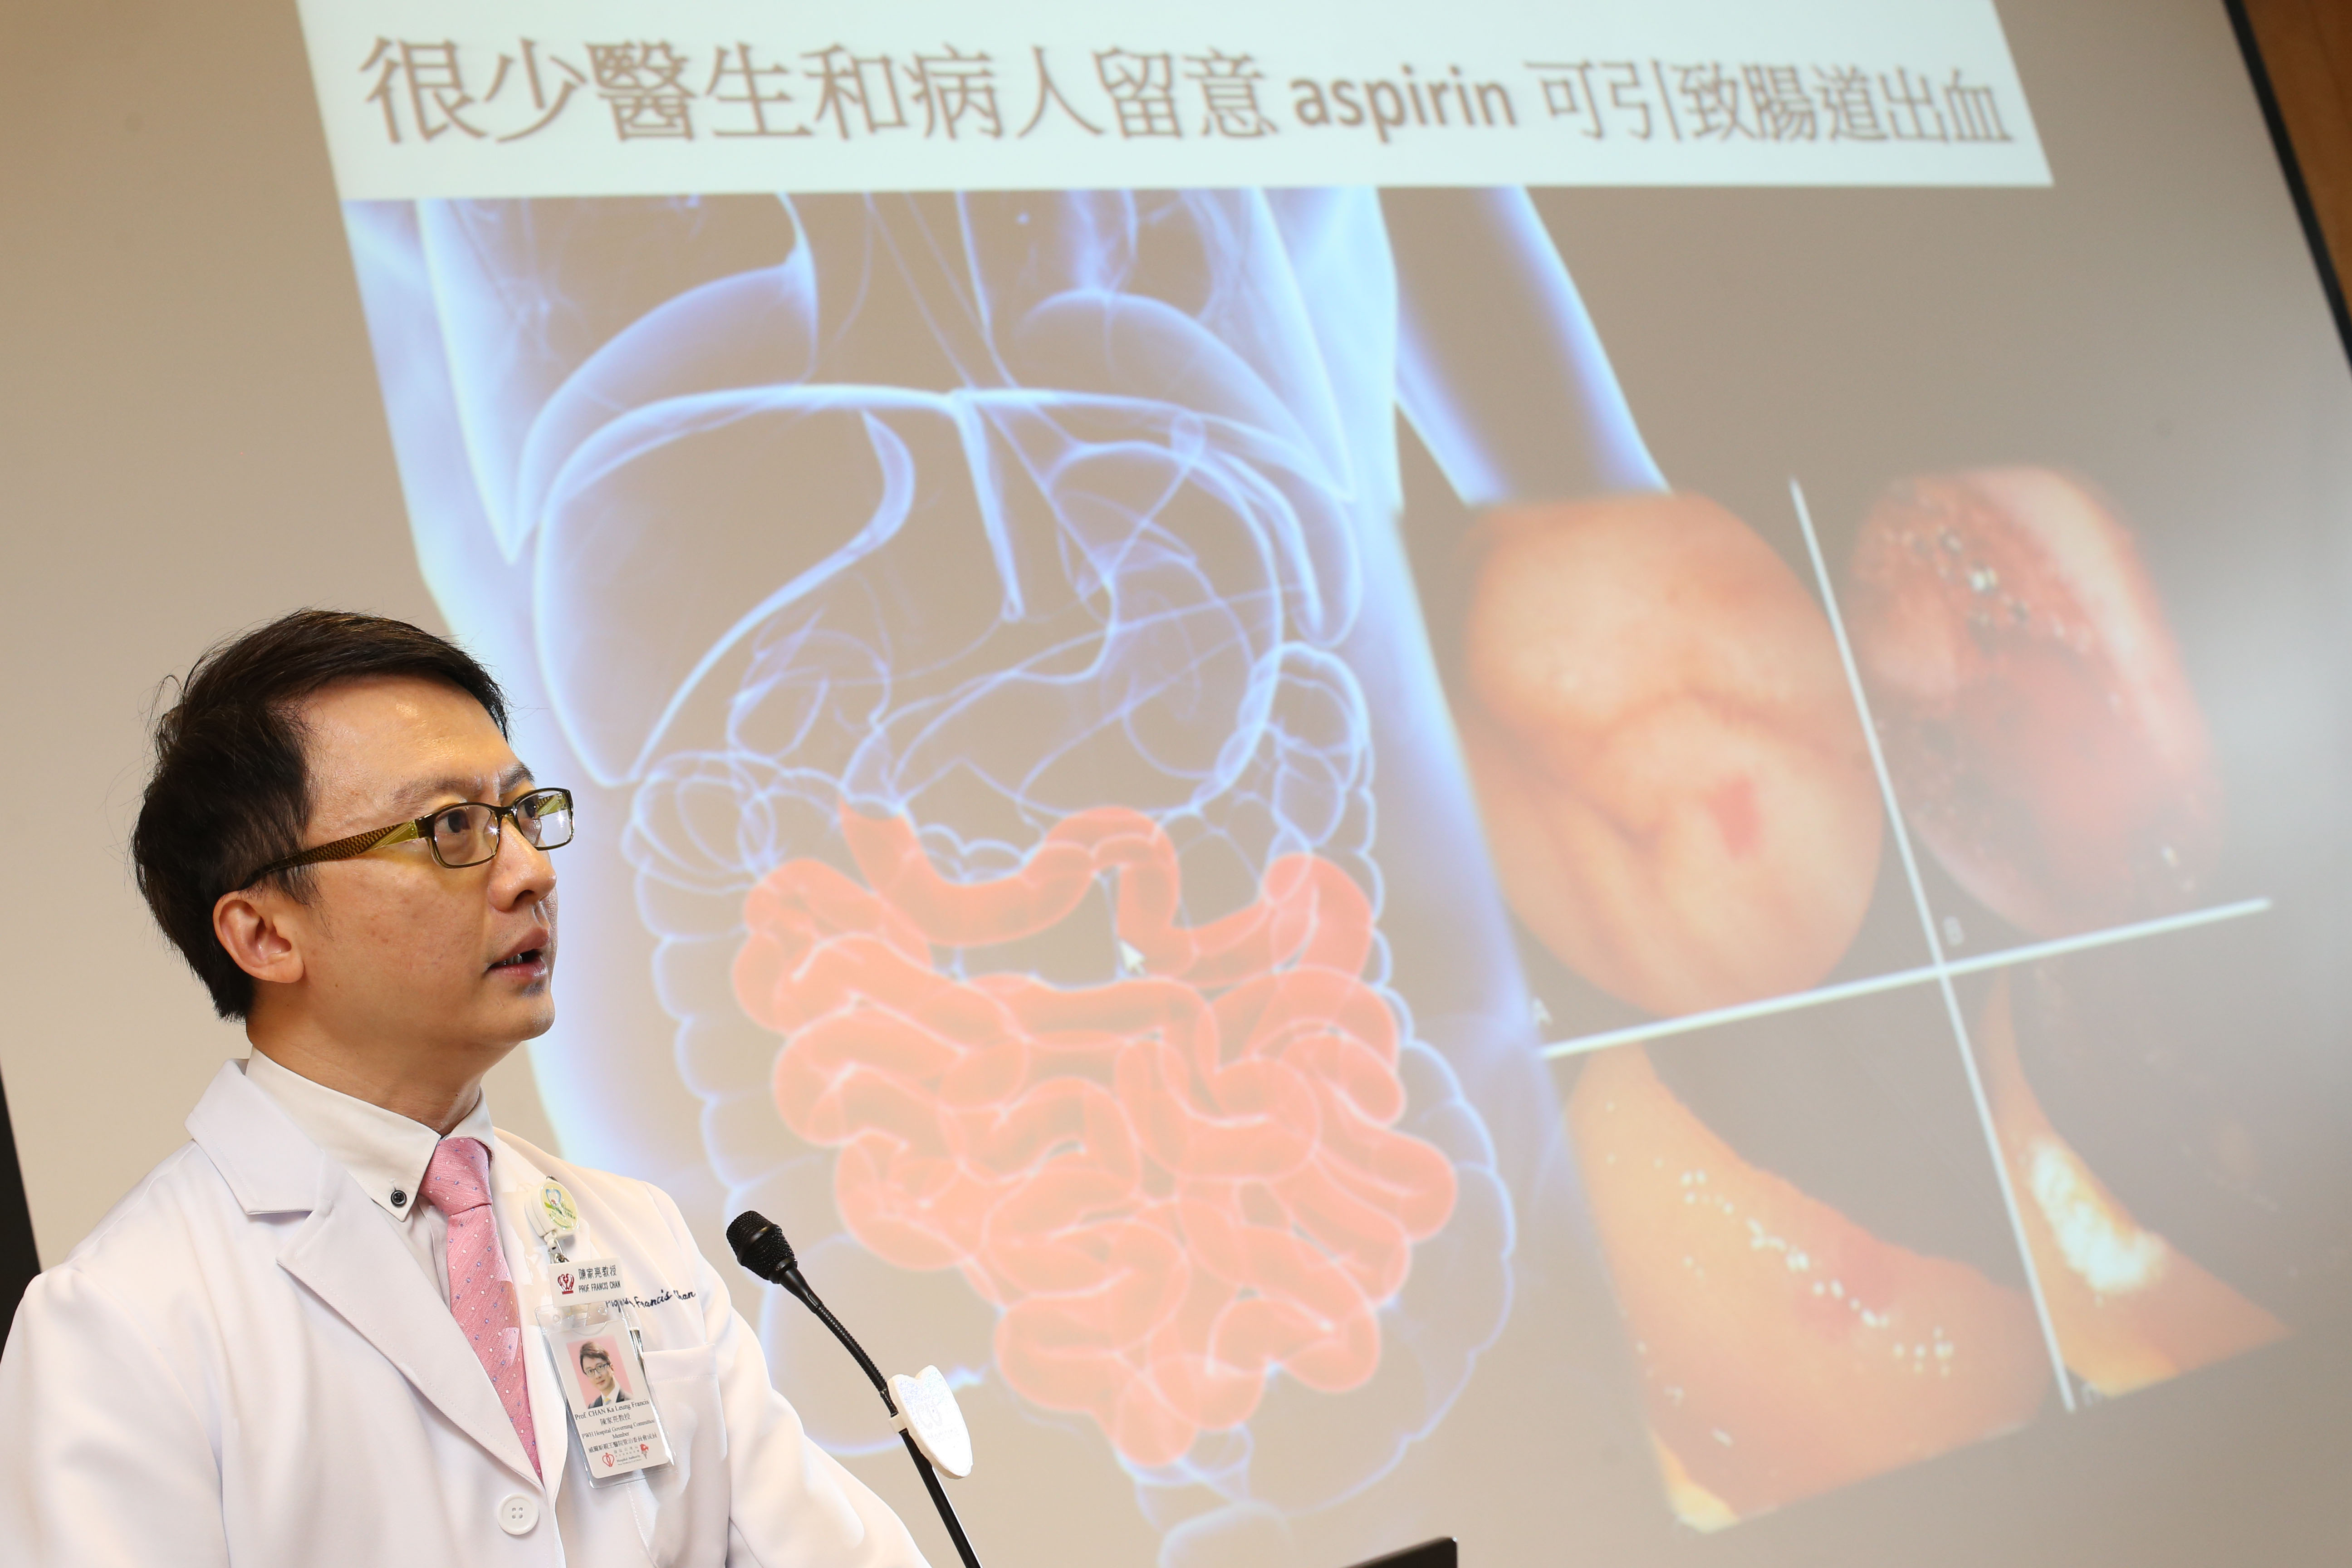 Prof. Francis CHAN states that the side effects of aspirin in the stomach are well established but few doctors and patients are aware of the fact that aspirin also causes bleeding from the lower gastrointestinal tract.